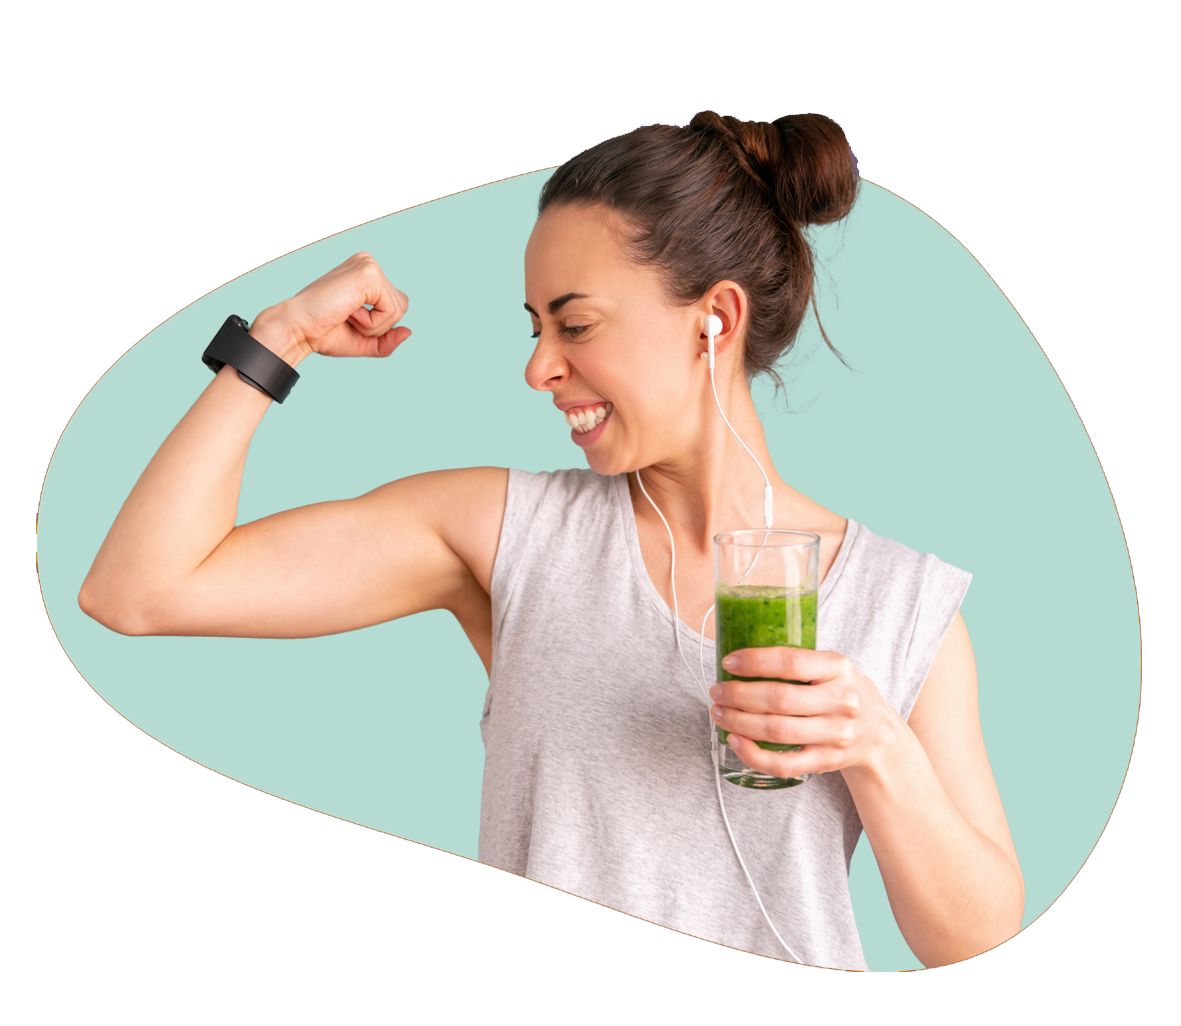 Lady showing arm muscles and holding green juice in other hand.